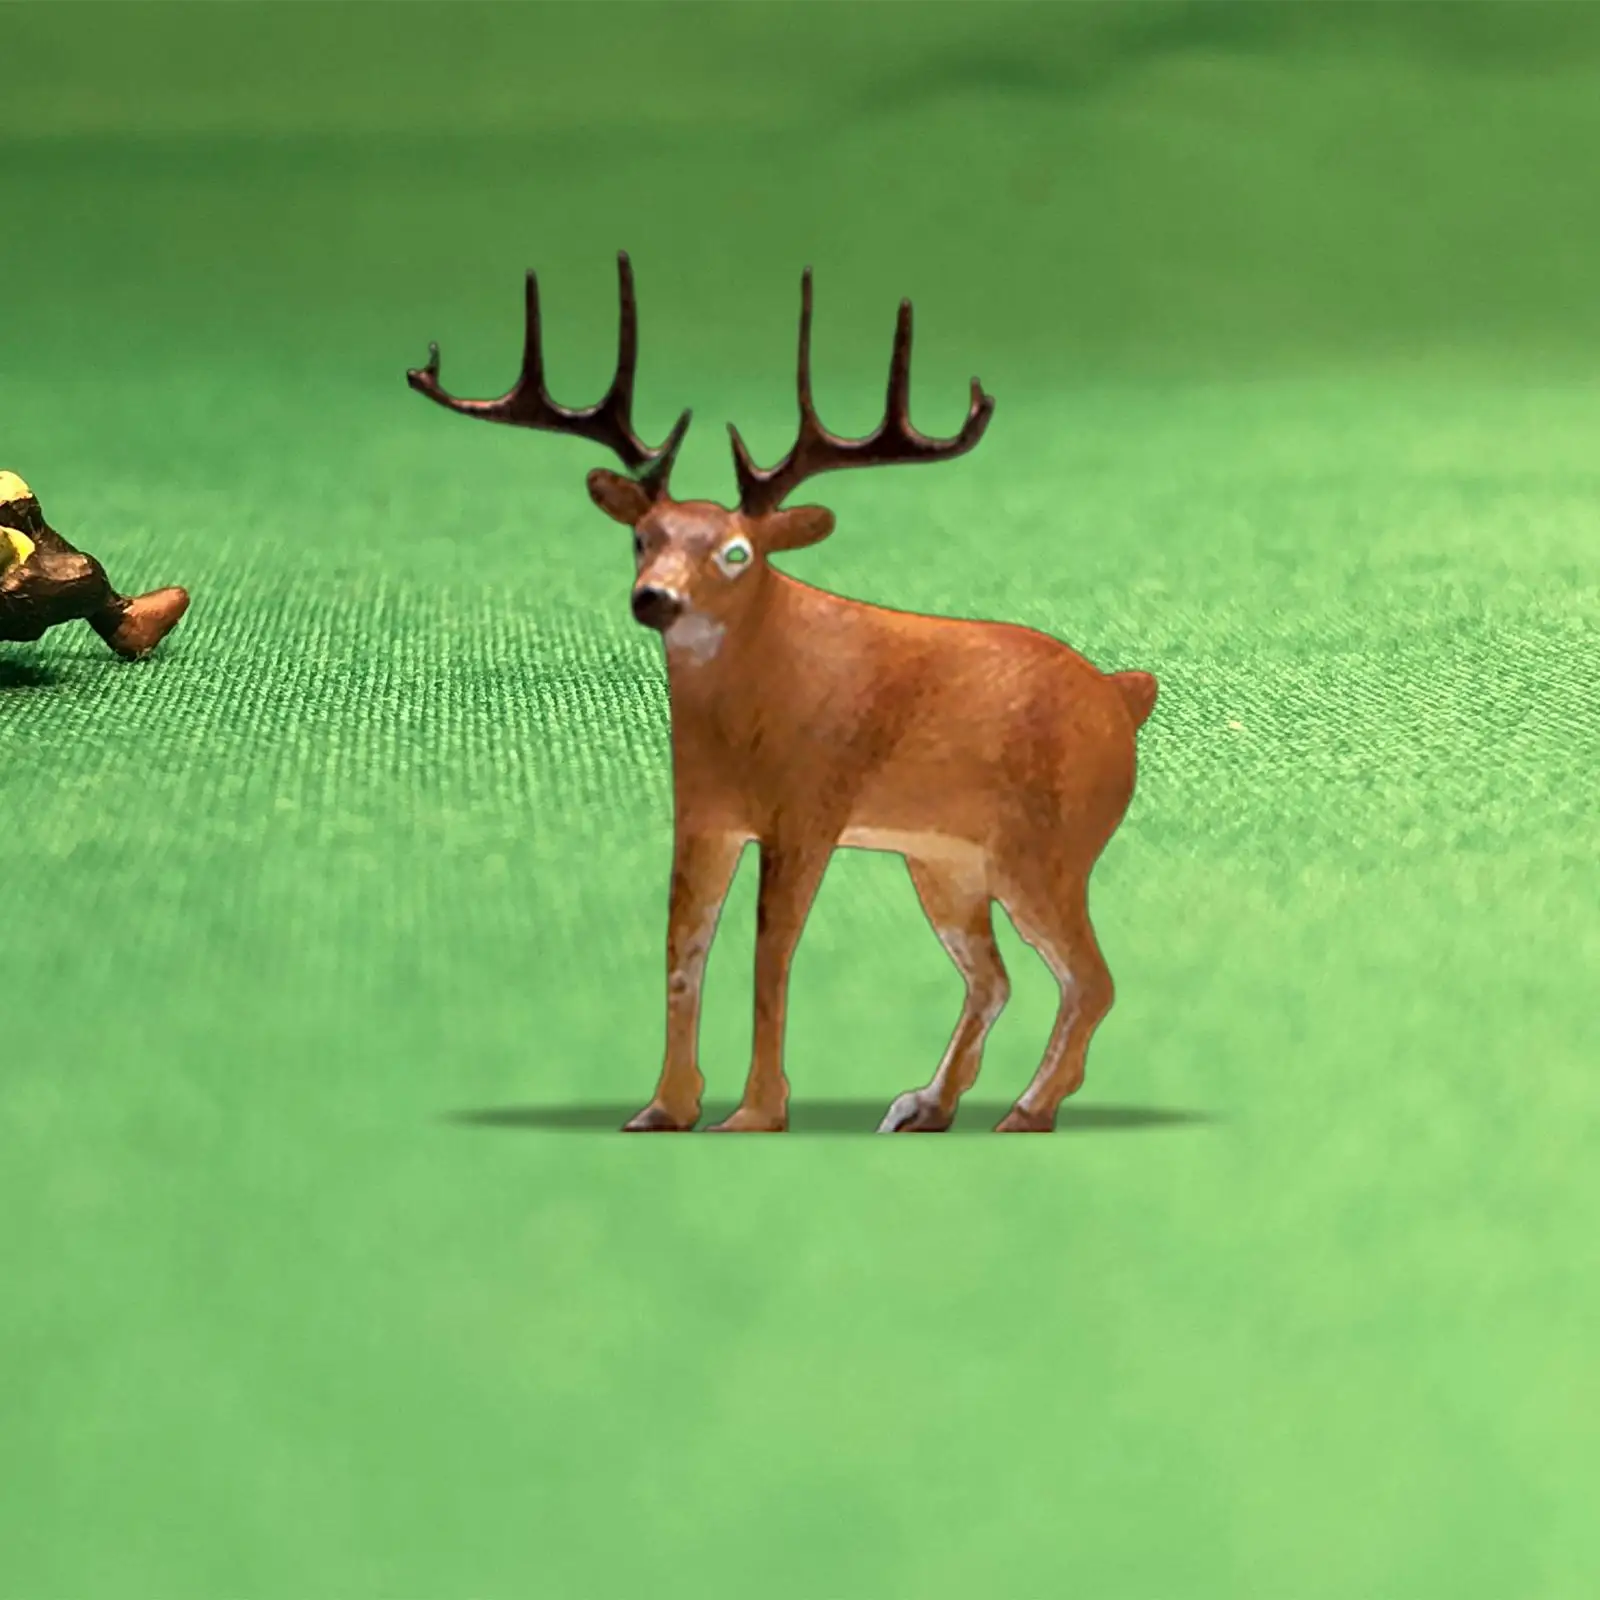 Animal Figures 1:64 Hand Painted Toy Mini Deer Figure DIY Projects Miniature Scene Layout Architecture Model Micro Landscape